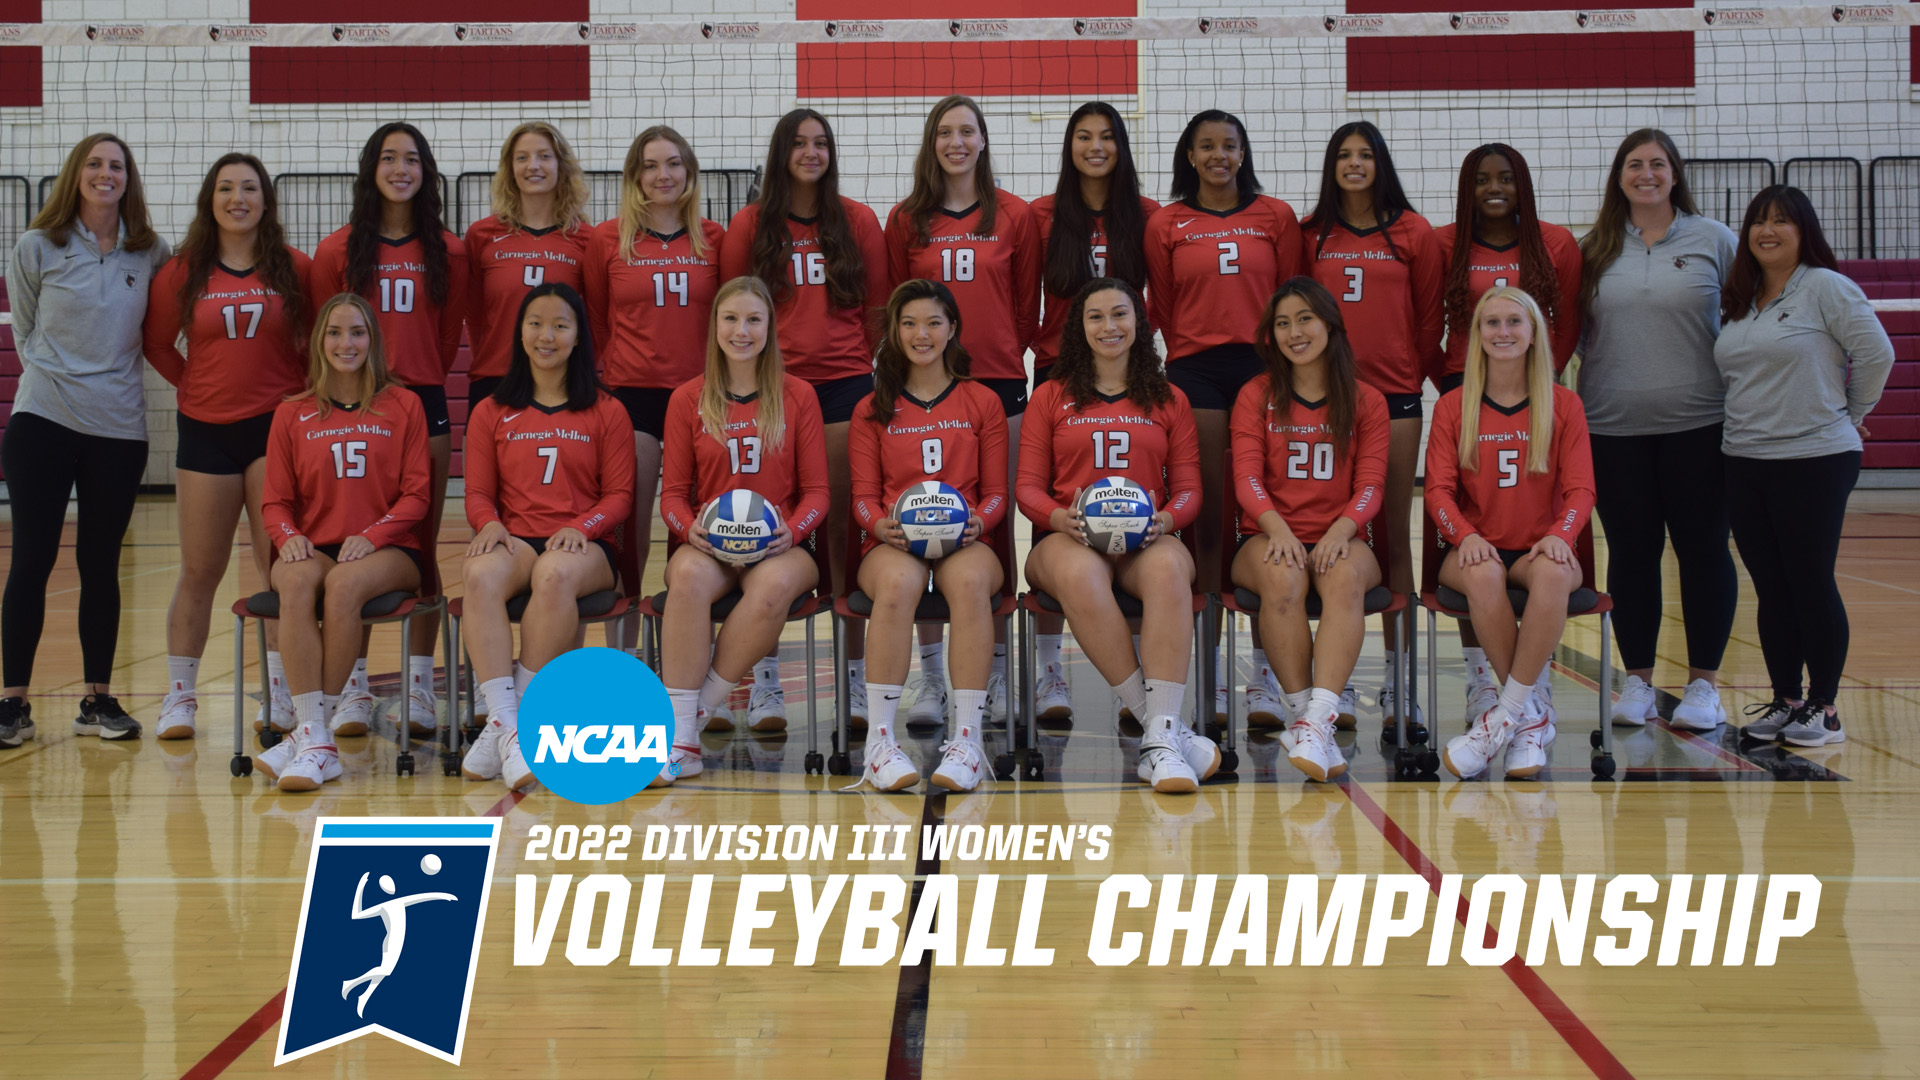 women's volleyball team photo with players wearing red uniforms and sitting in two rows, text on top reads 2022 Division III Women's Volleyball Championship